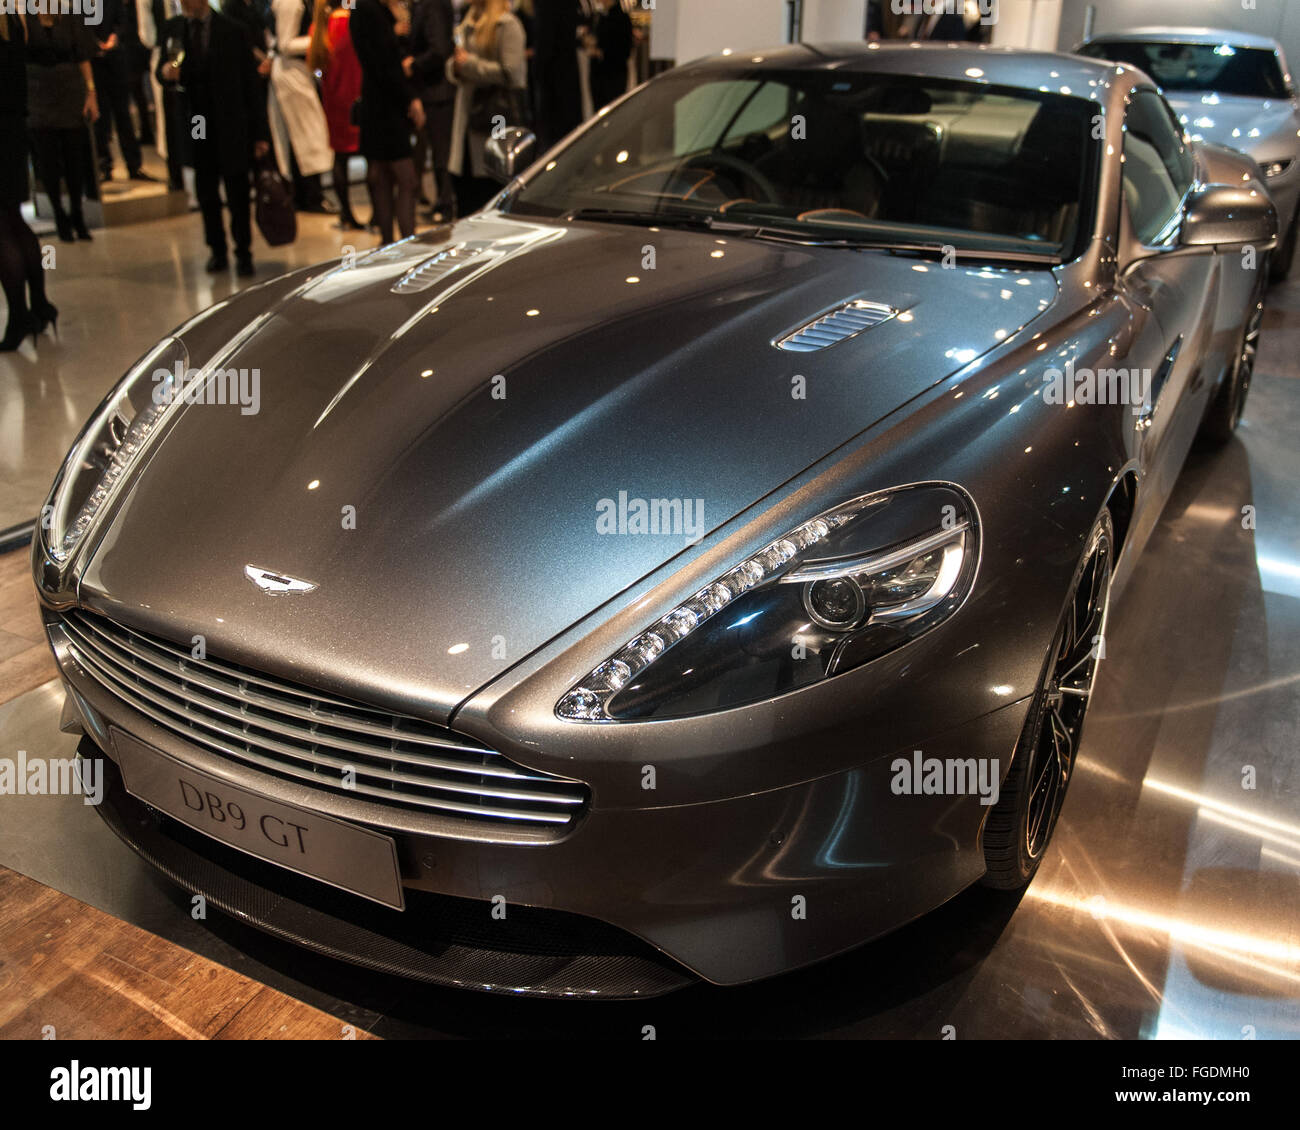 Three Aston Martin sports cars including the DB5 from Goldfinger and the DB10 from Spectre on display in Harrods.  Featuring: Aston Martin DB9 GT Where: London, United Kingdom When: 13 Jan 2016 Stock Photo